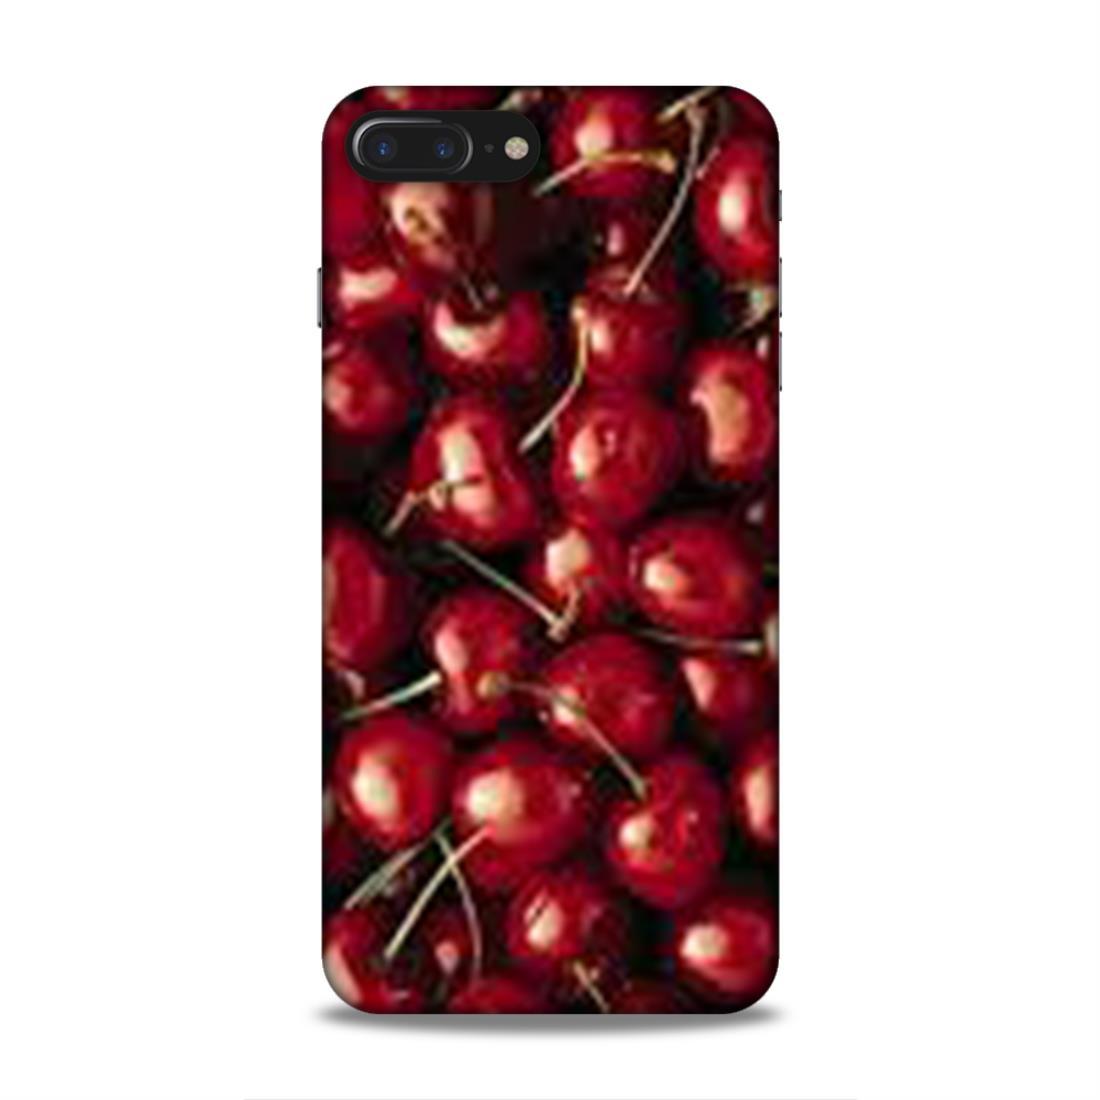 Red Cherry Love iPhone 7 Plus Mobile Cover Case